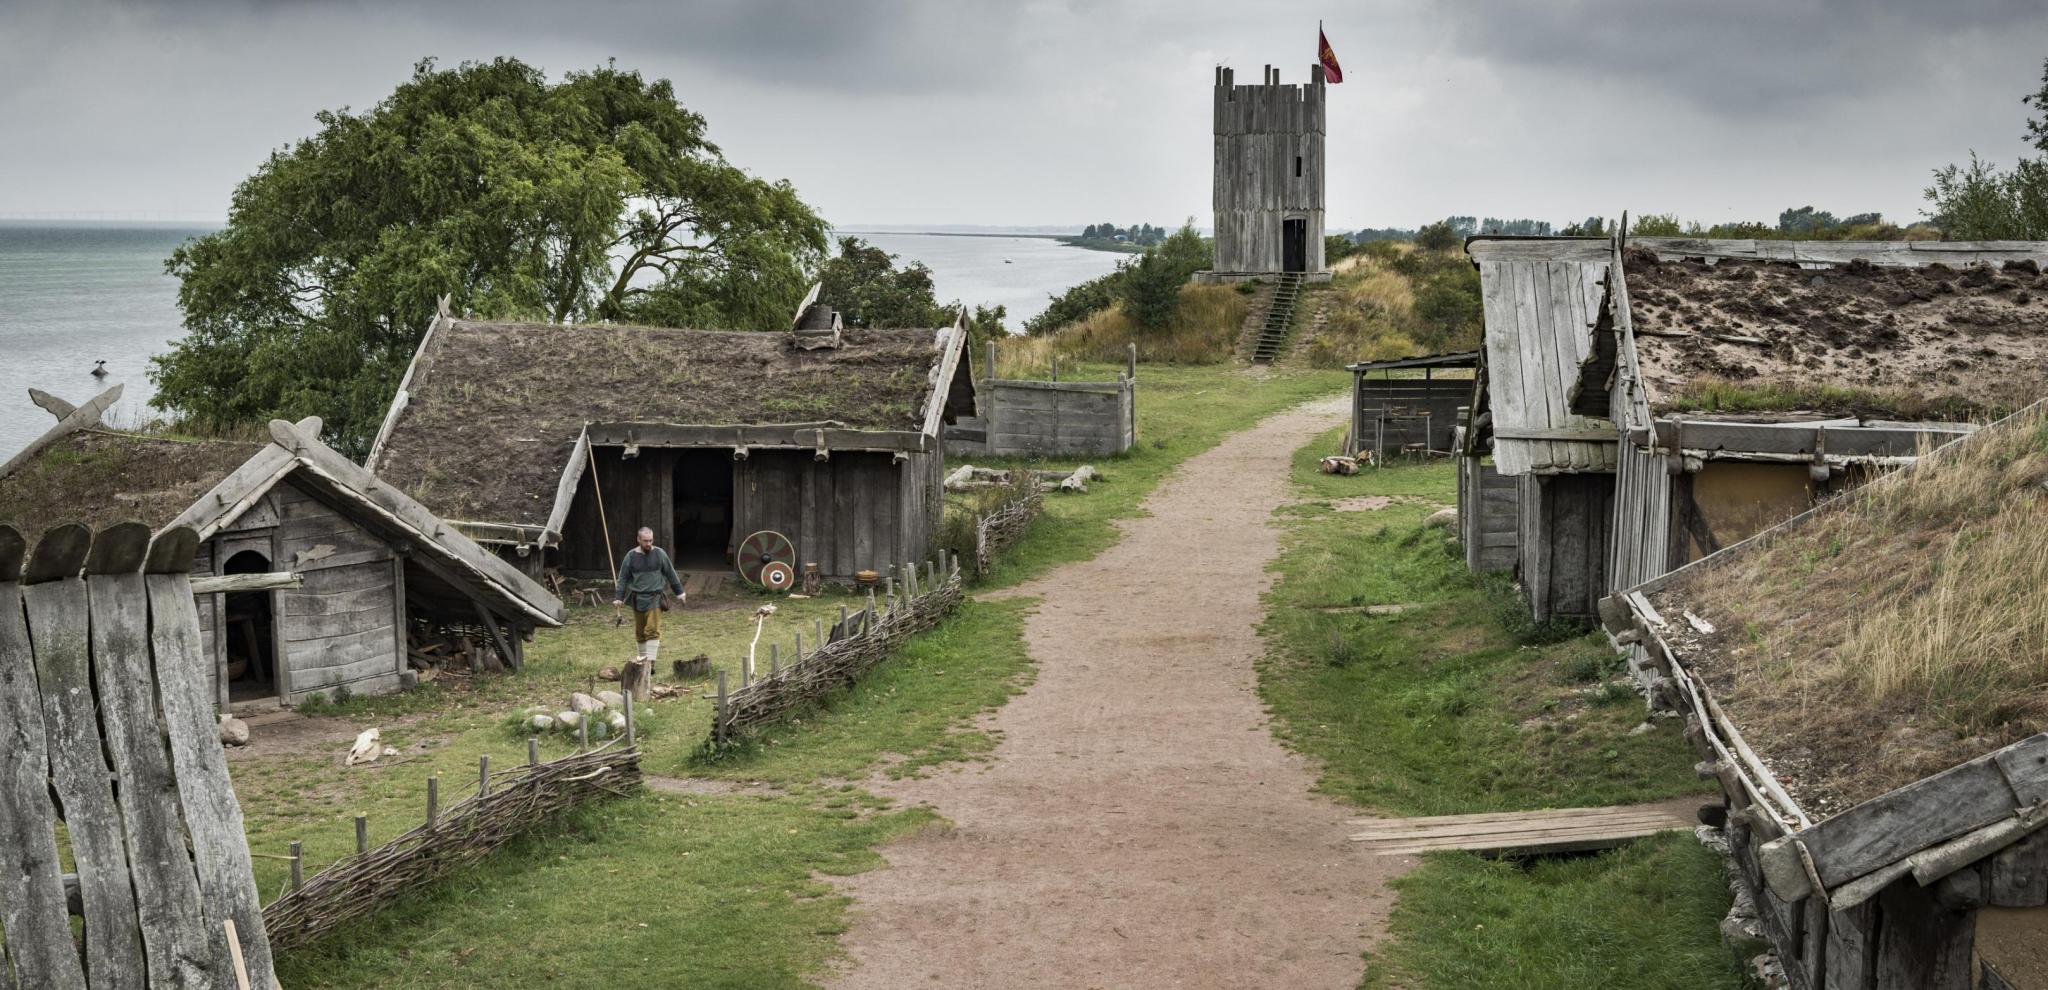 A gravel road and surrounding wooden houses in the Viking village of Fotevikens Museums